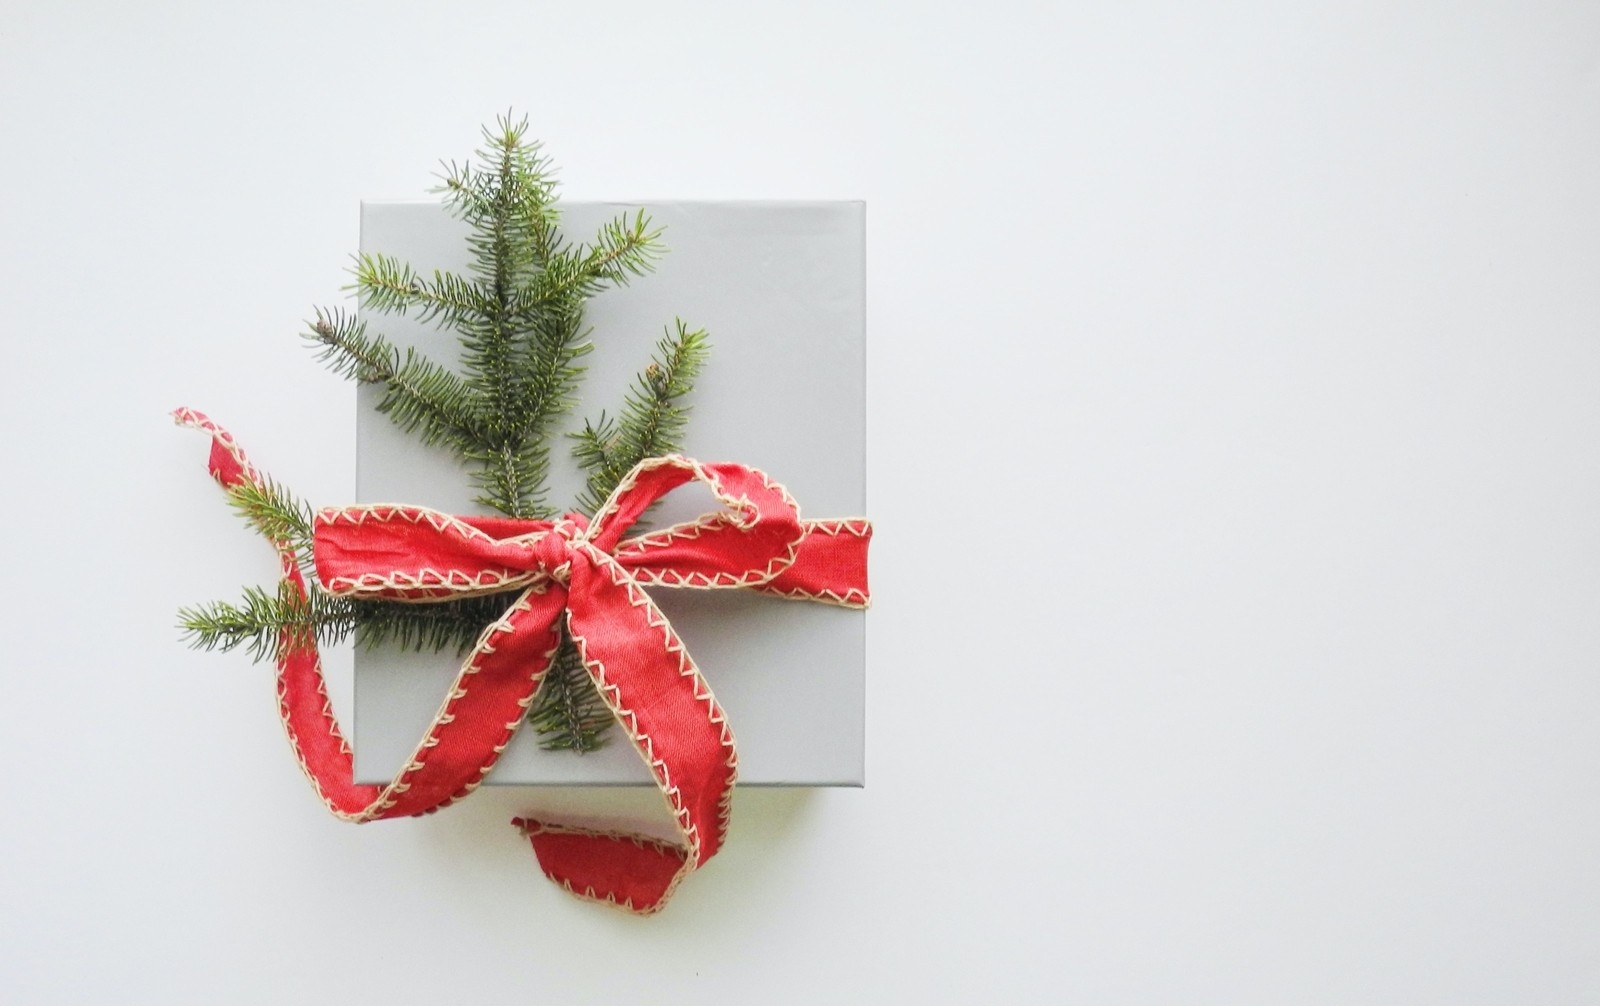 A small, light grey square box is tied with a red ribbon and small piece of pine. It sits against a white background